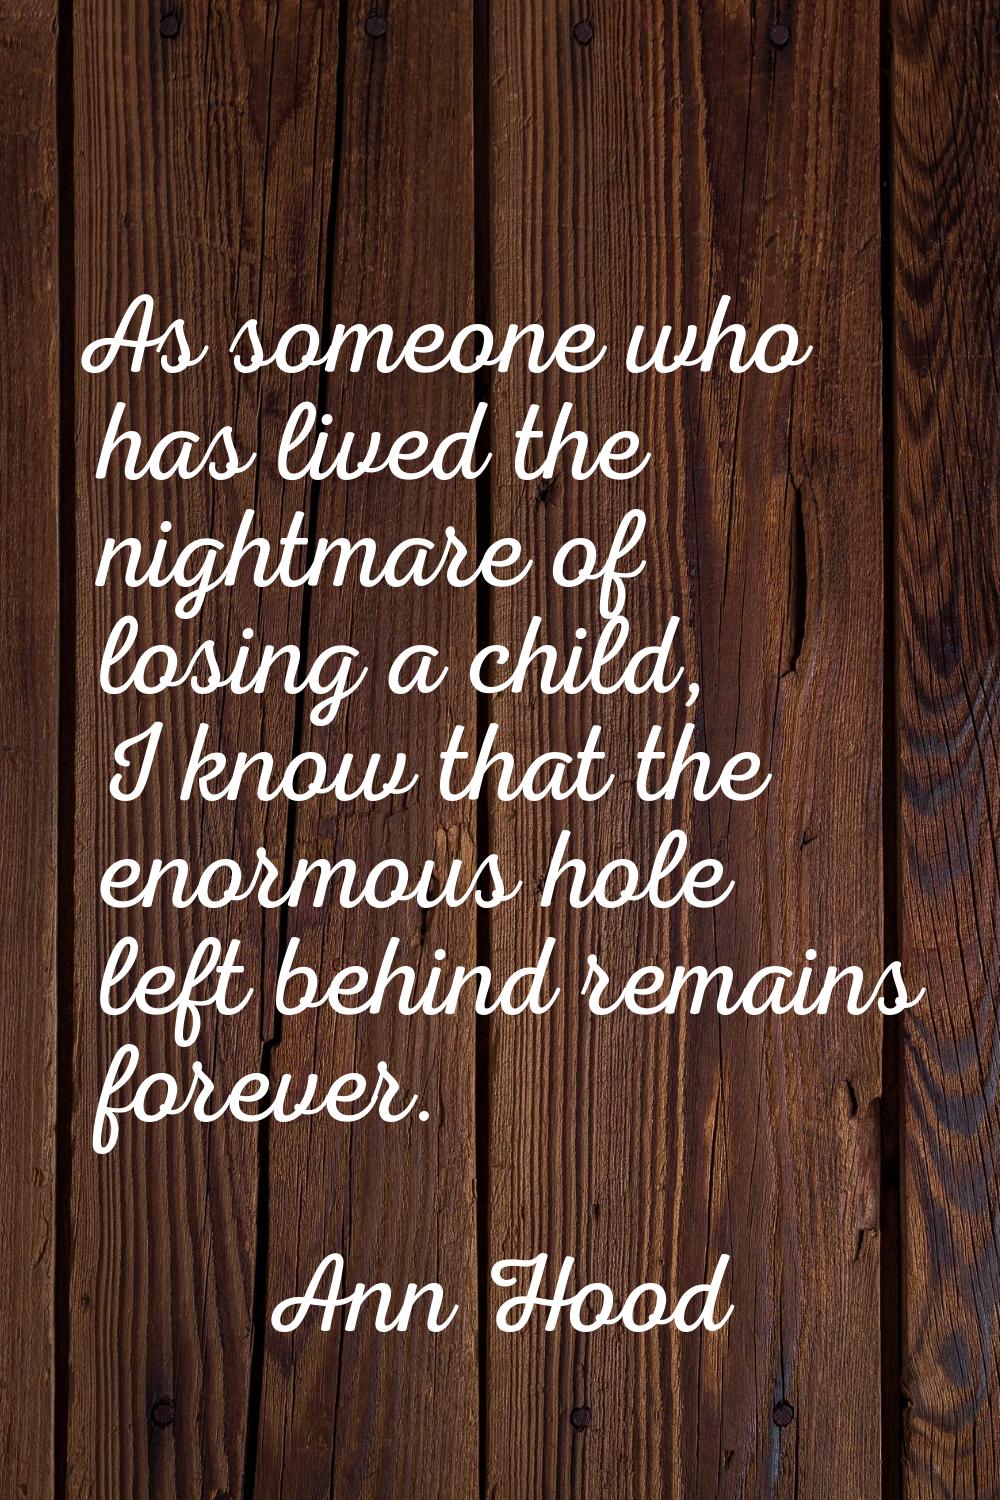 As someone who has lived the nightmare of losing a child, I know that the enormous hole left behind